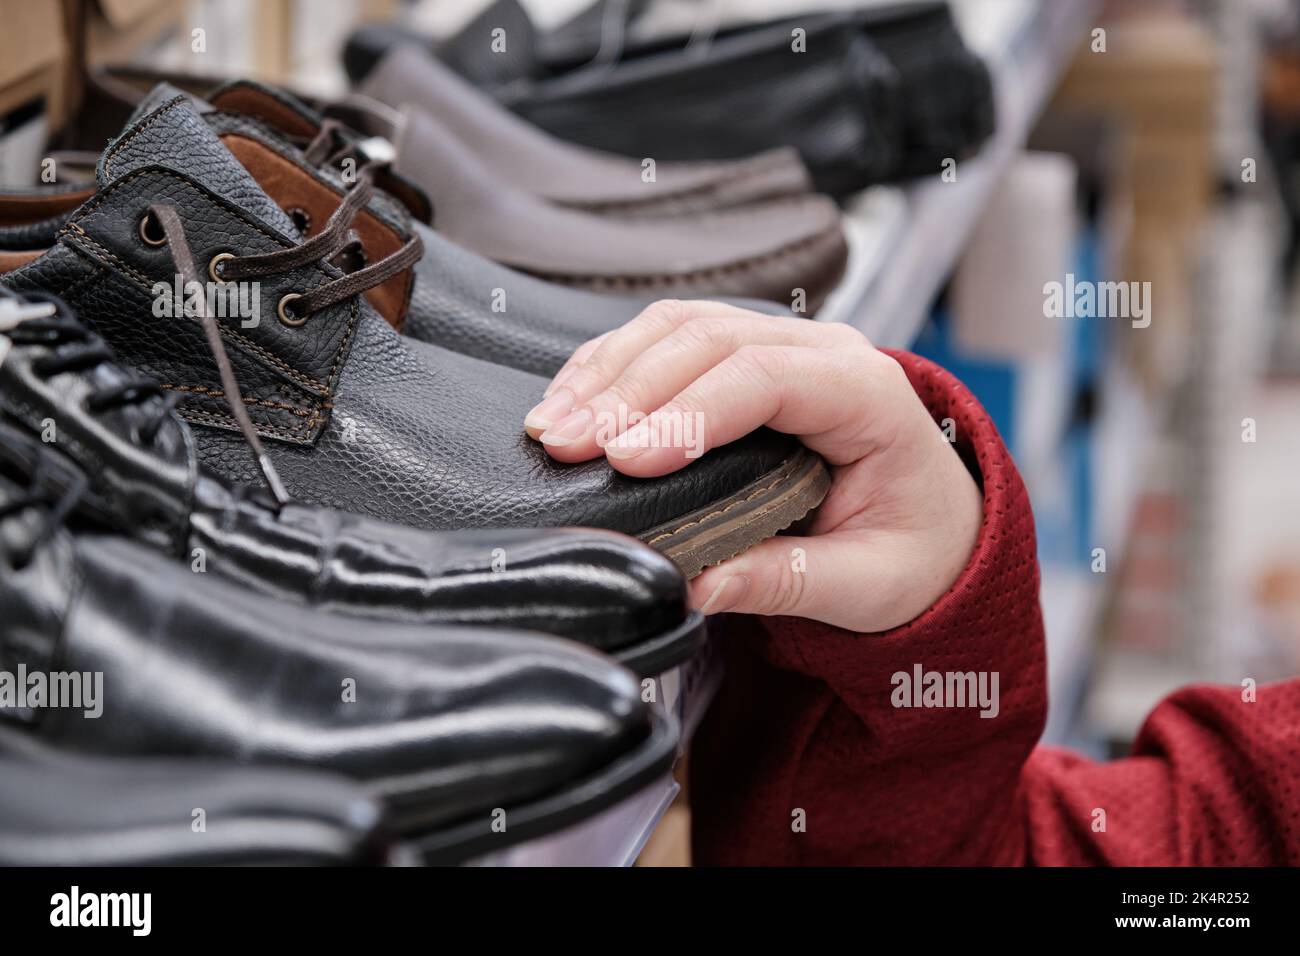 Woman in a clothing store chooses patent leather shoes under a business suit Stock Photo